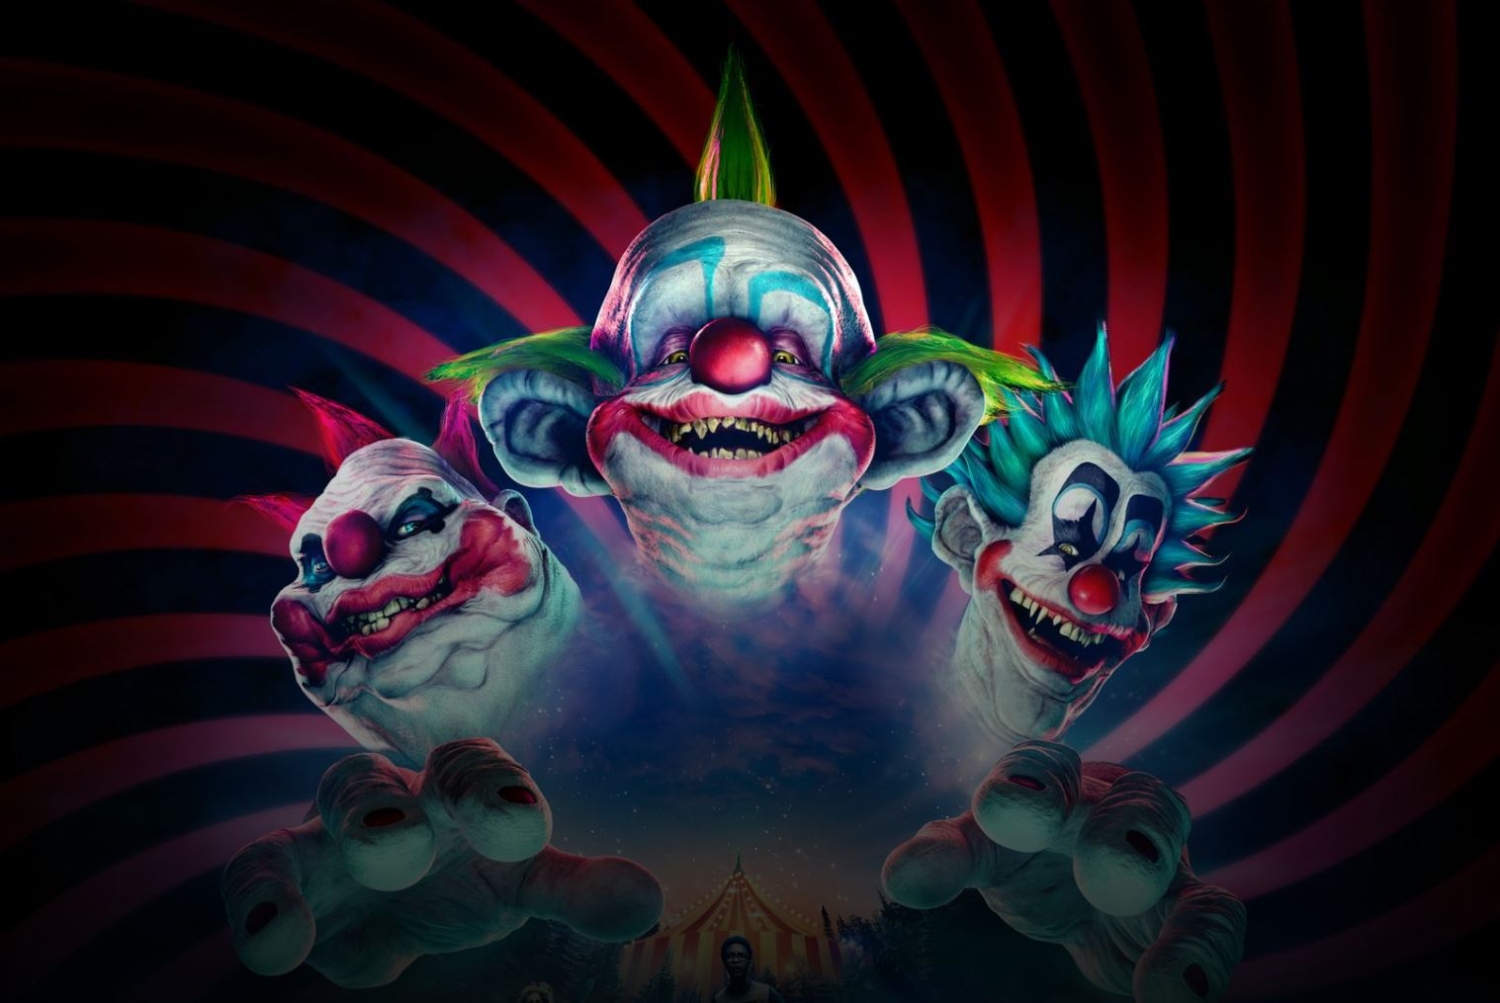 Killer Klowns From Outer Space game: 7vs3 asymmetrical multiplayer